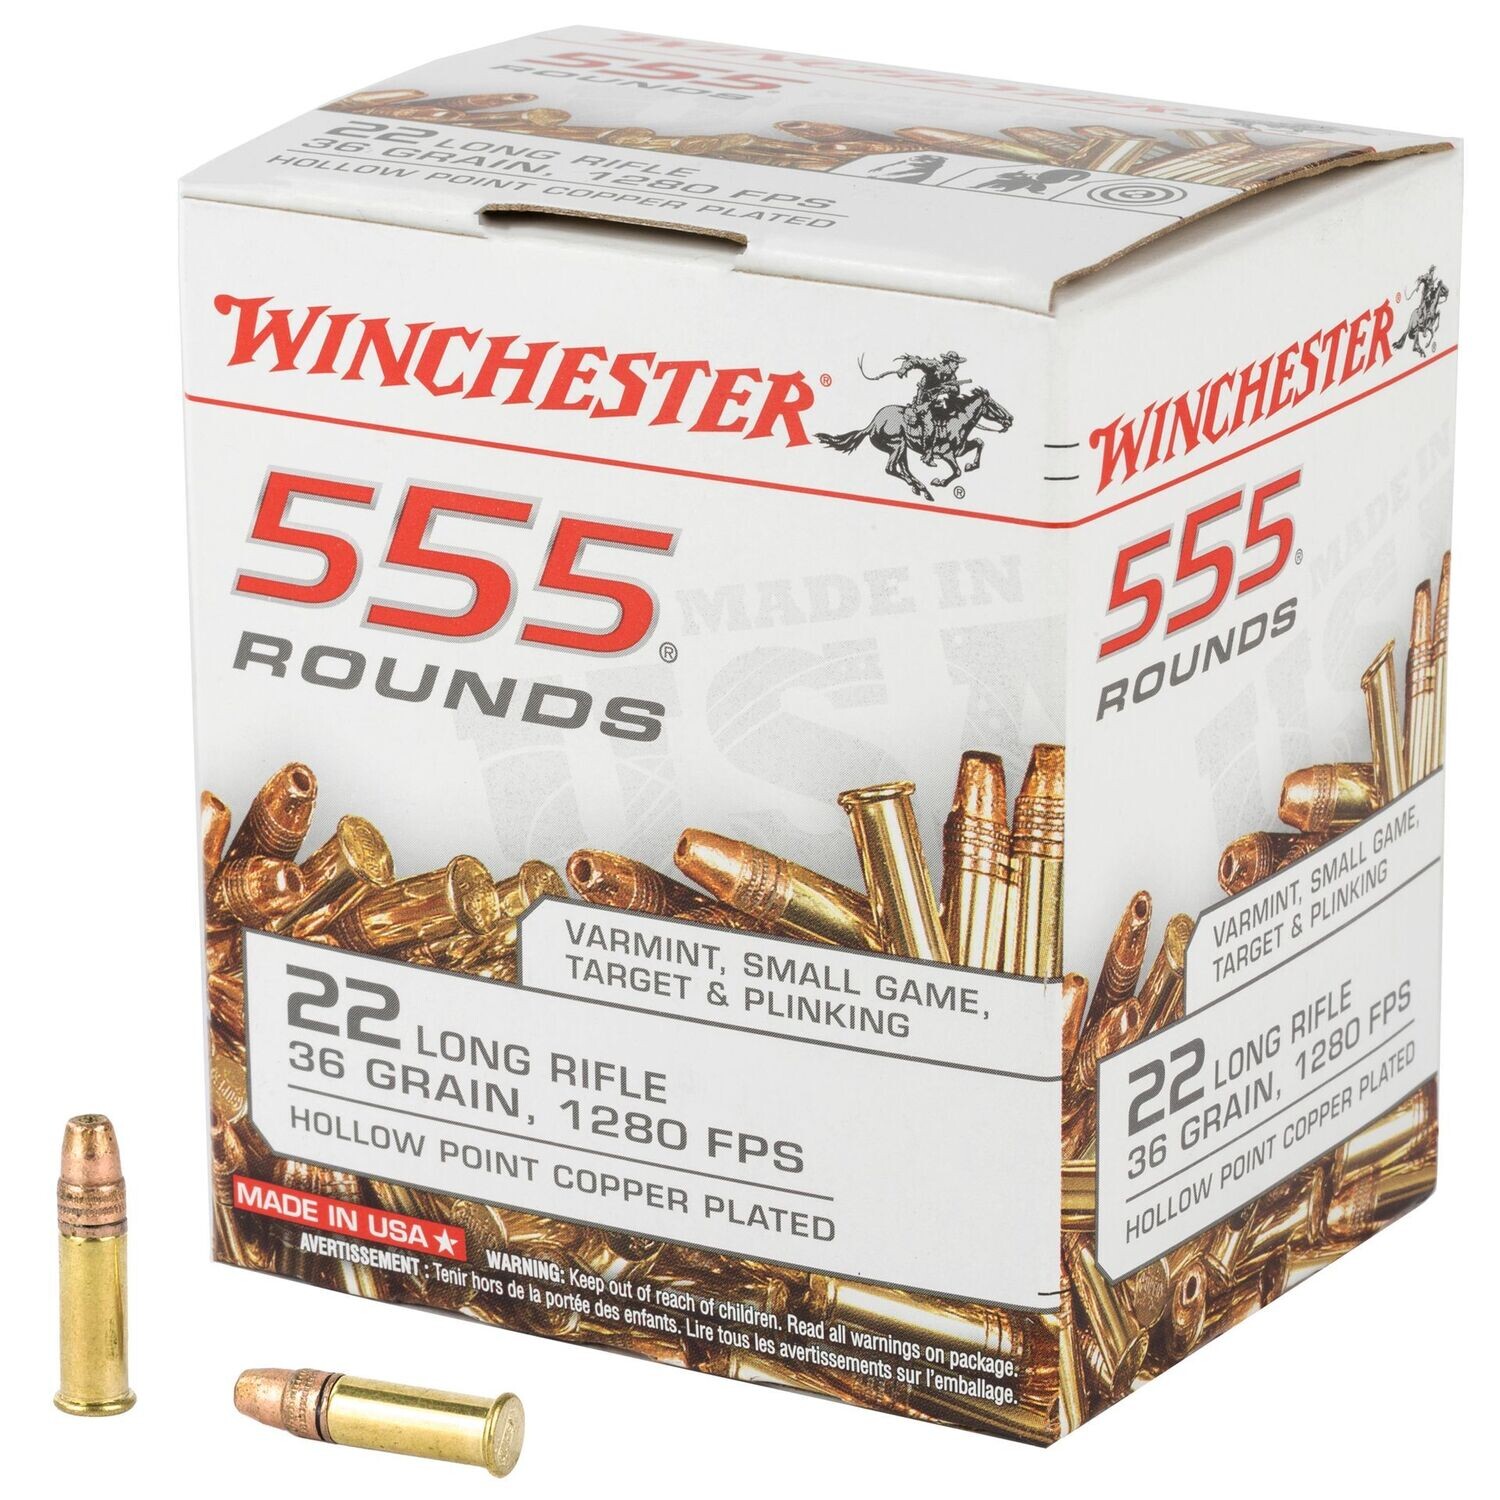 WINCHESTER 22LR 36GR CPR HP 555/5550